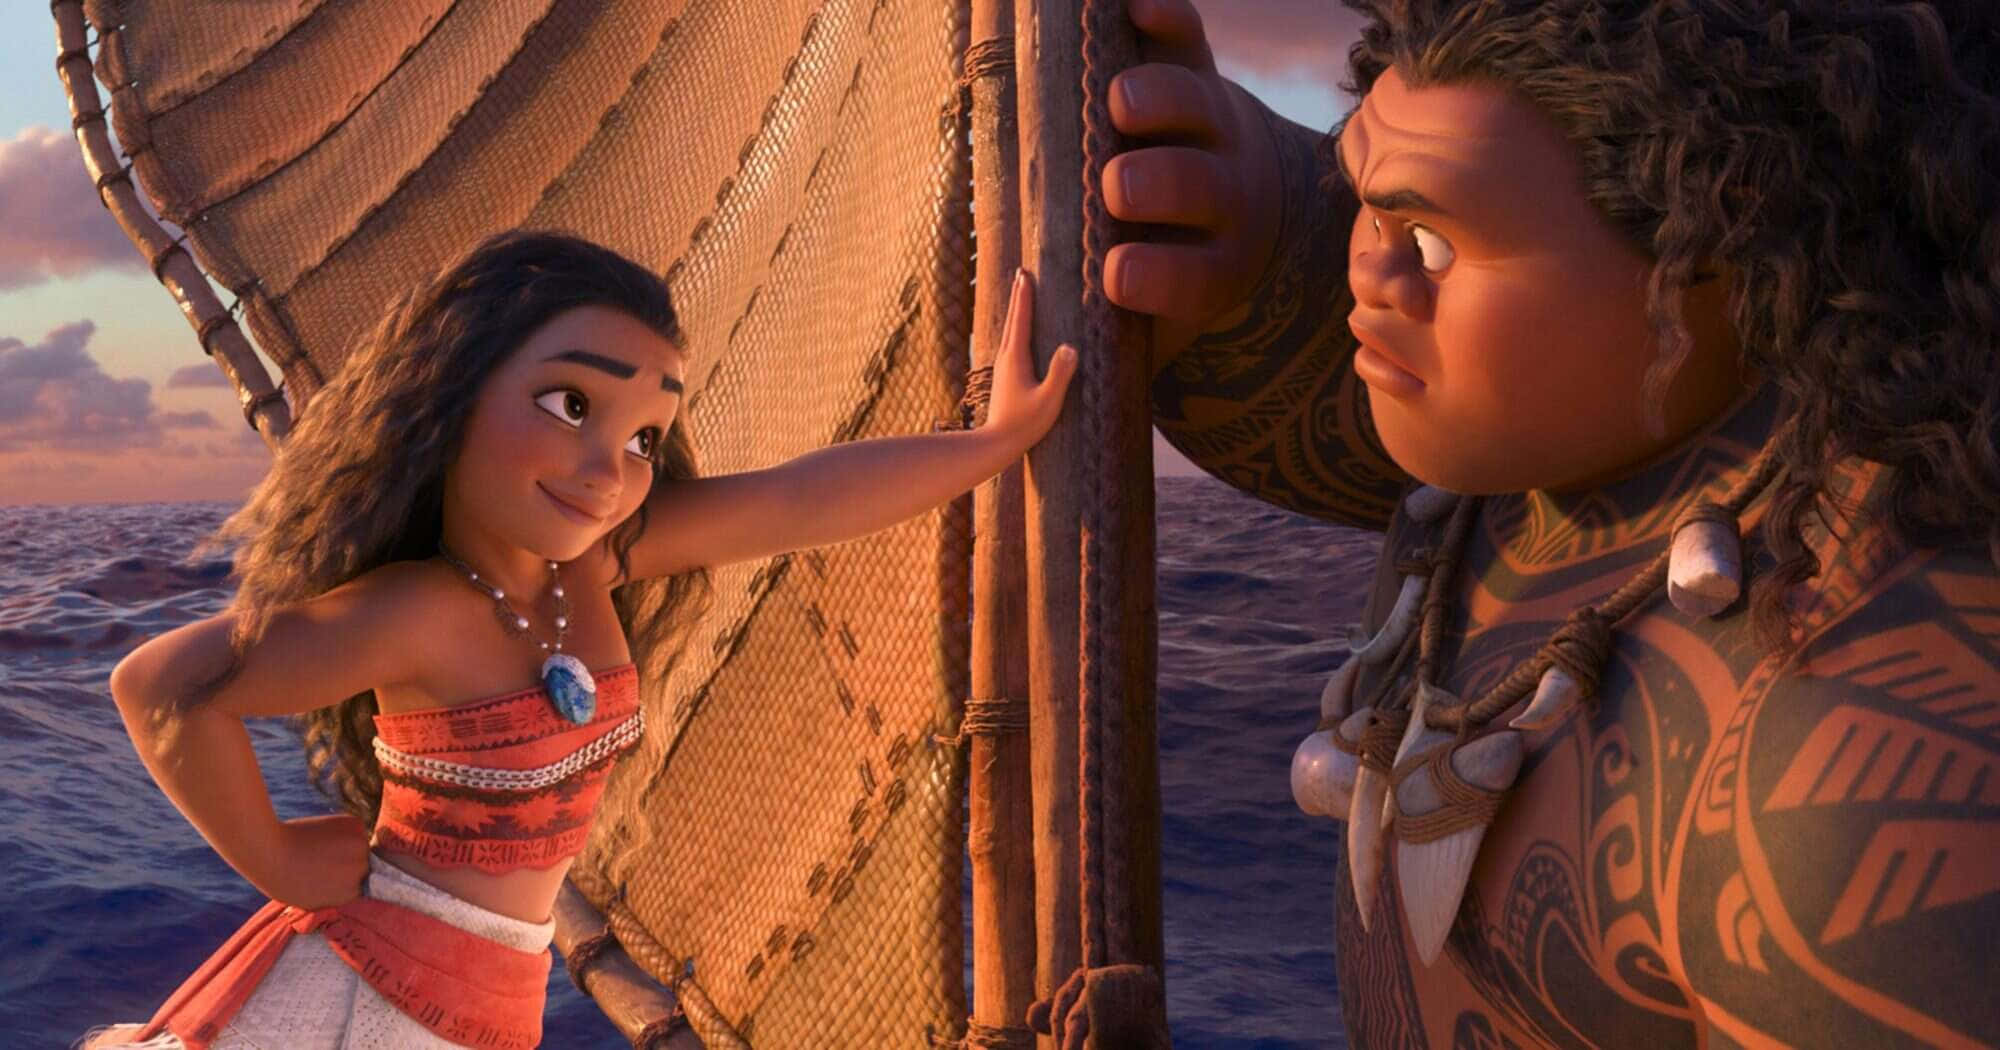 Feel the courage and determination of Moana as she embarks on a life-changing journey.